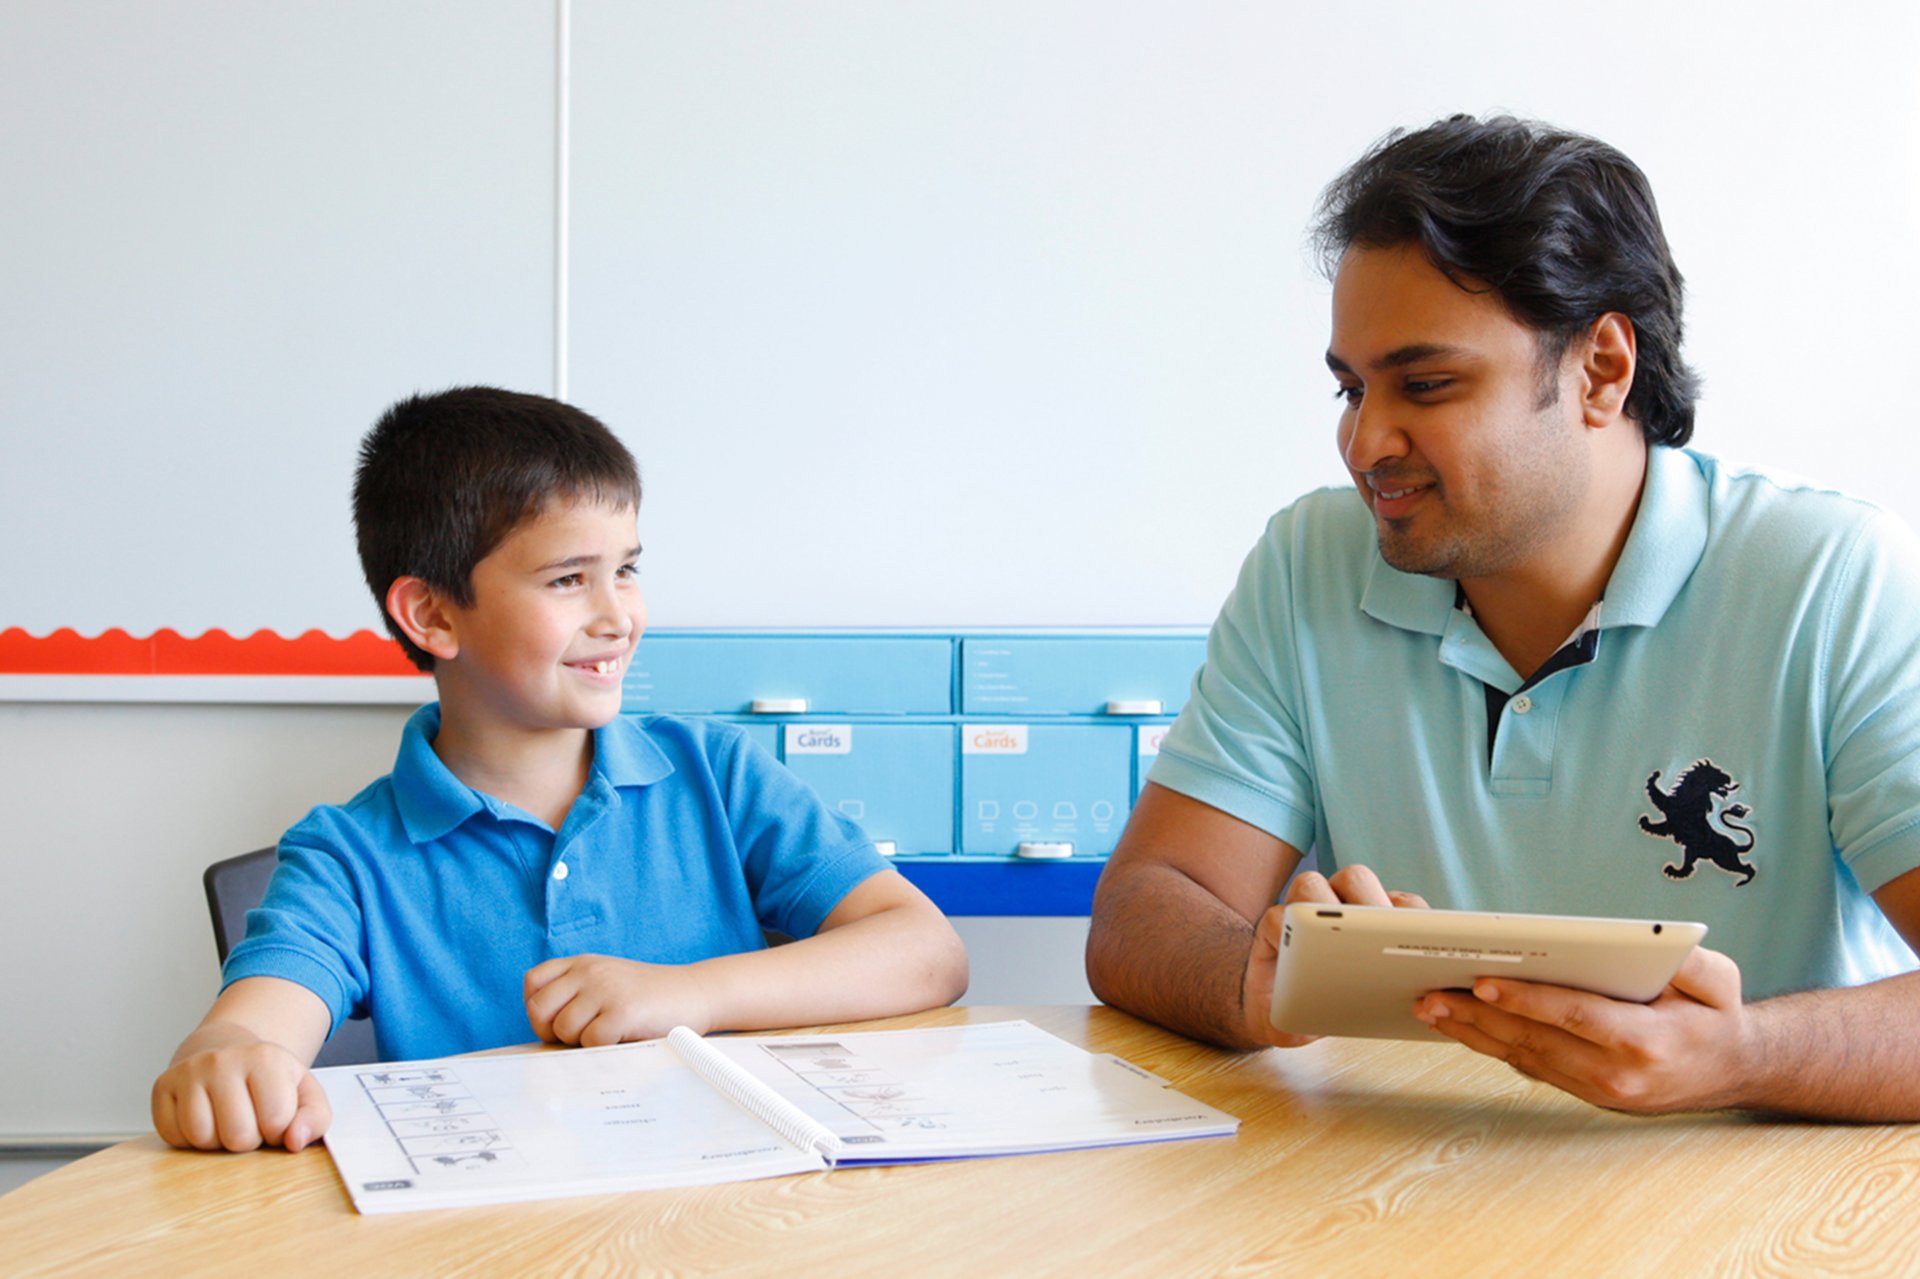 A man and a young boy in blue polo shirts sit at a table in a classroom, interacting and smiling as the man programs a tablet.